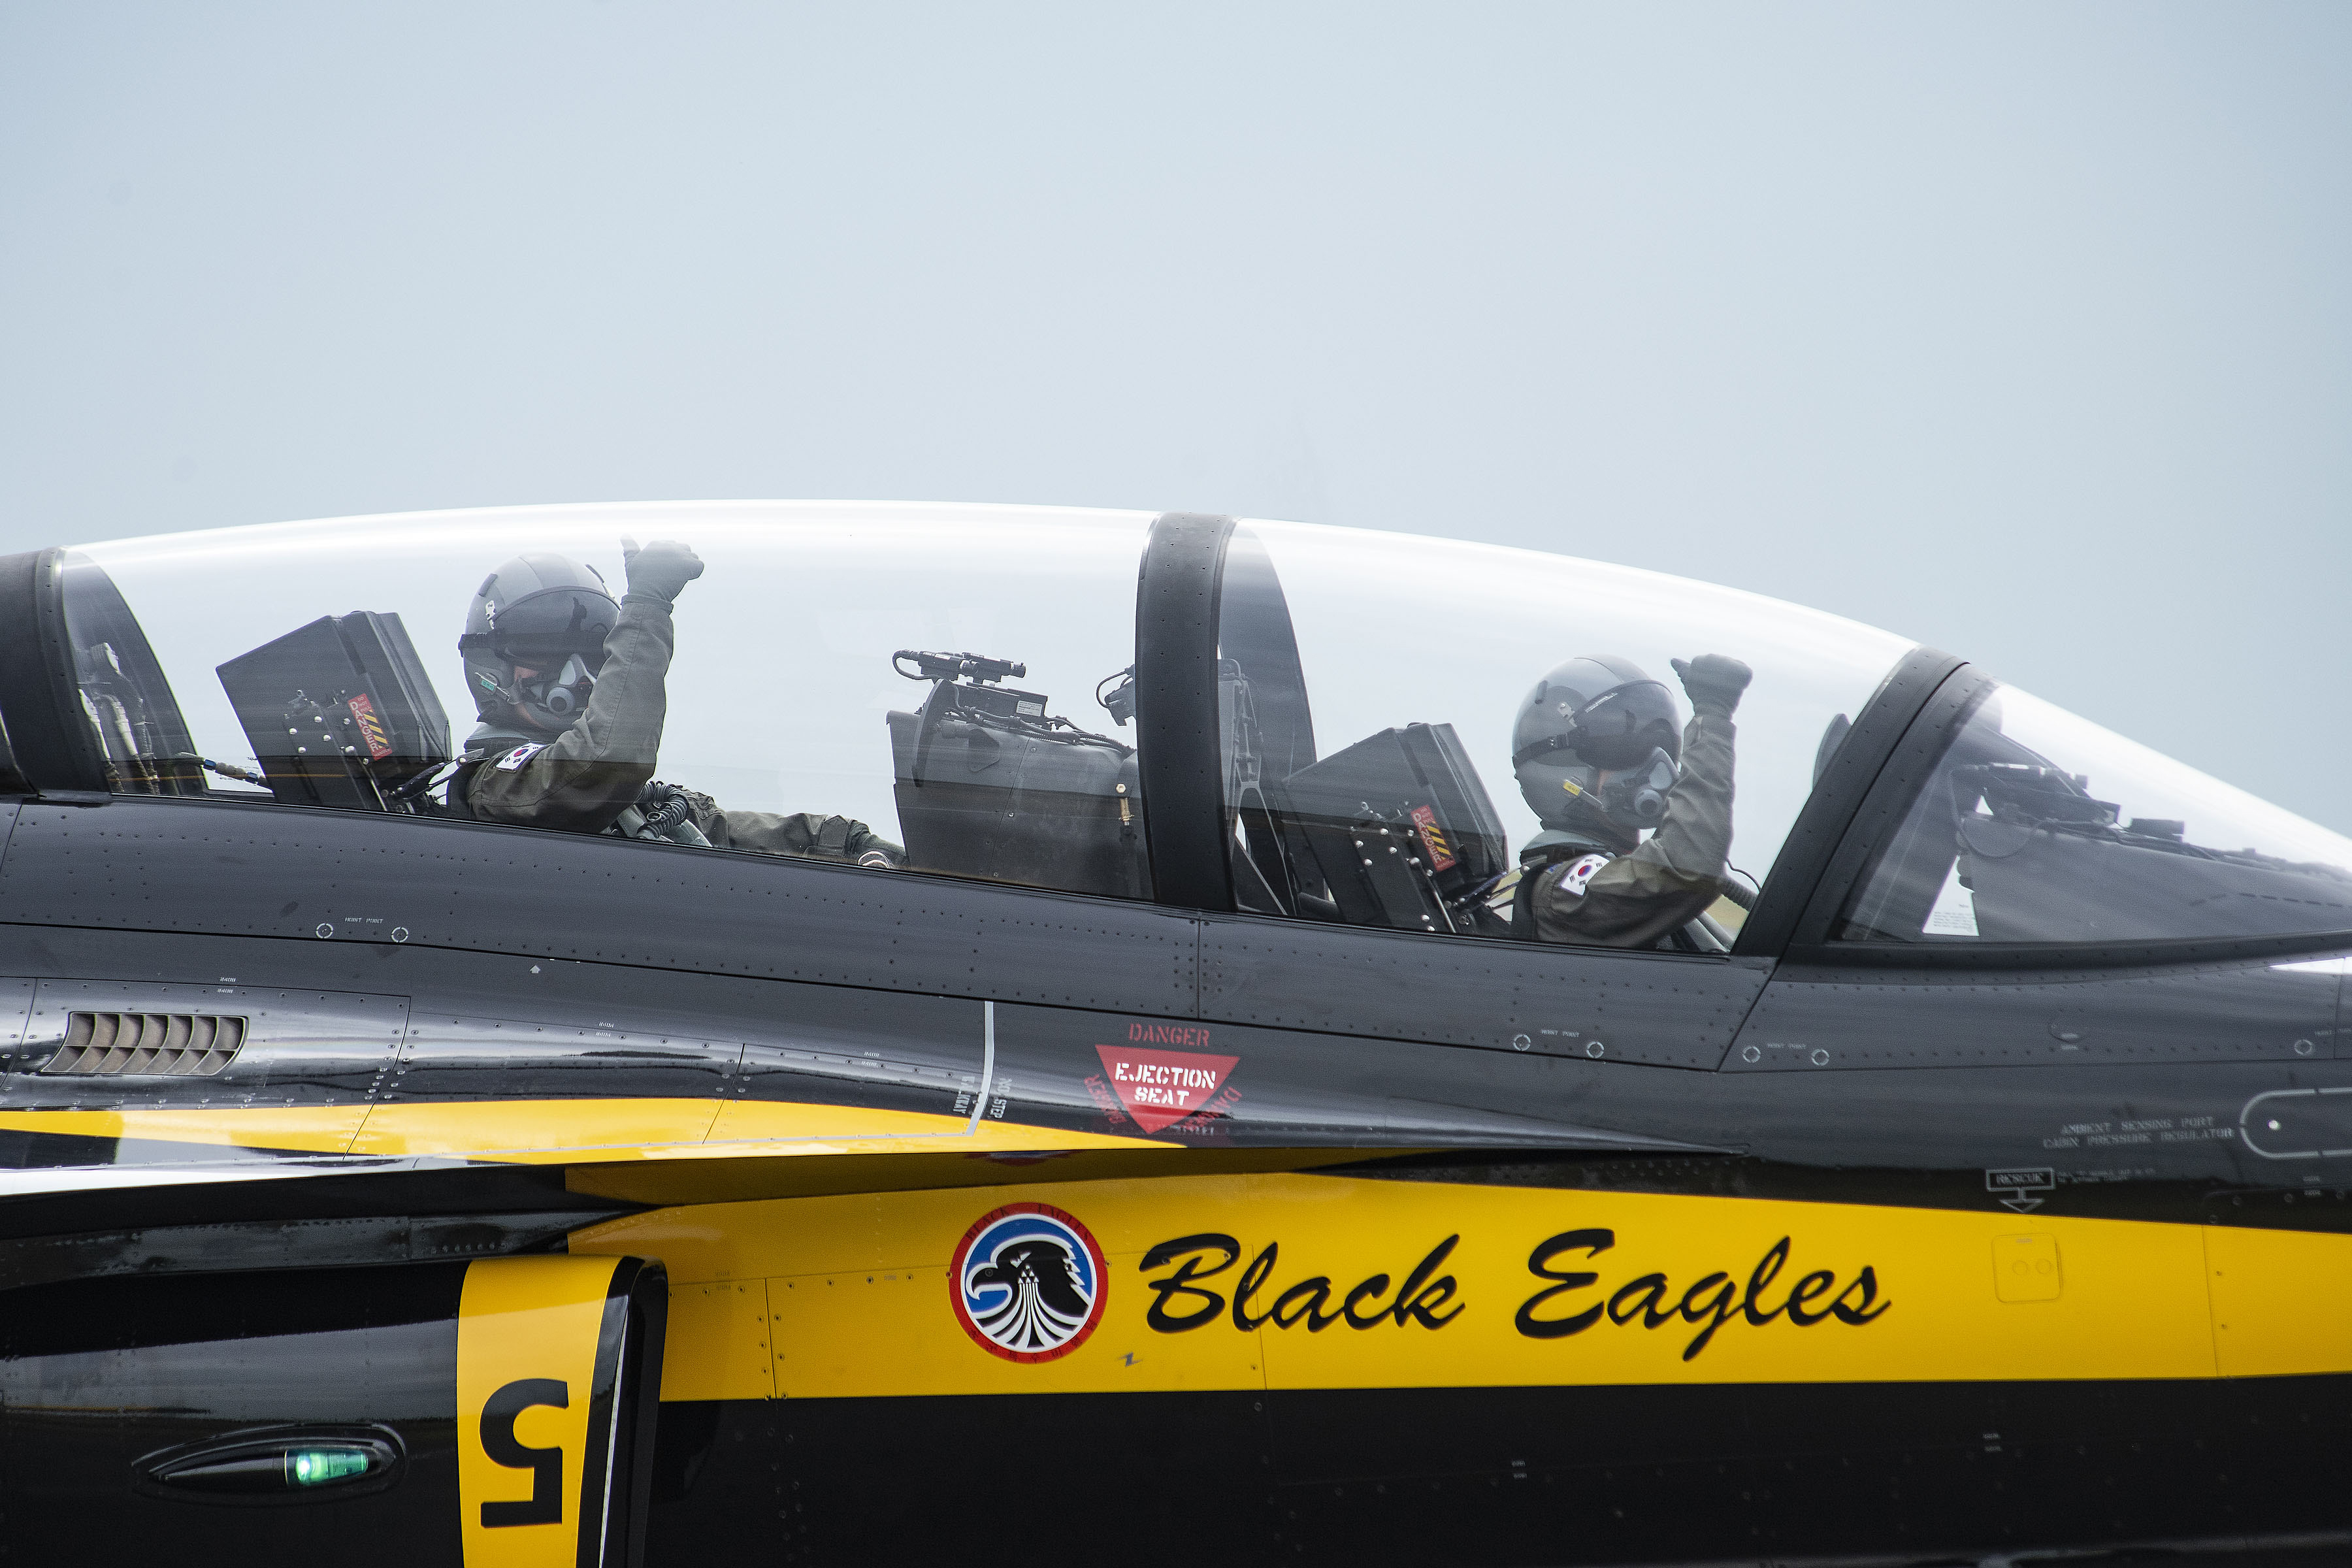 Image shows two Korean Air Force Pilots giving the thumbs up from the cockpit of a Black Eagle.